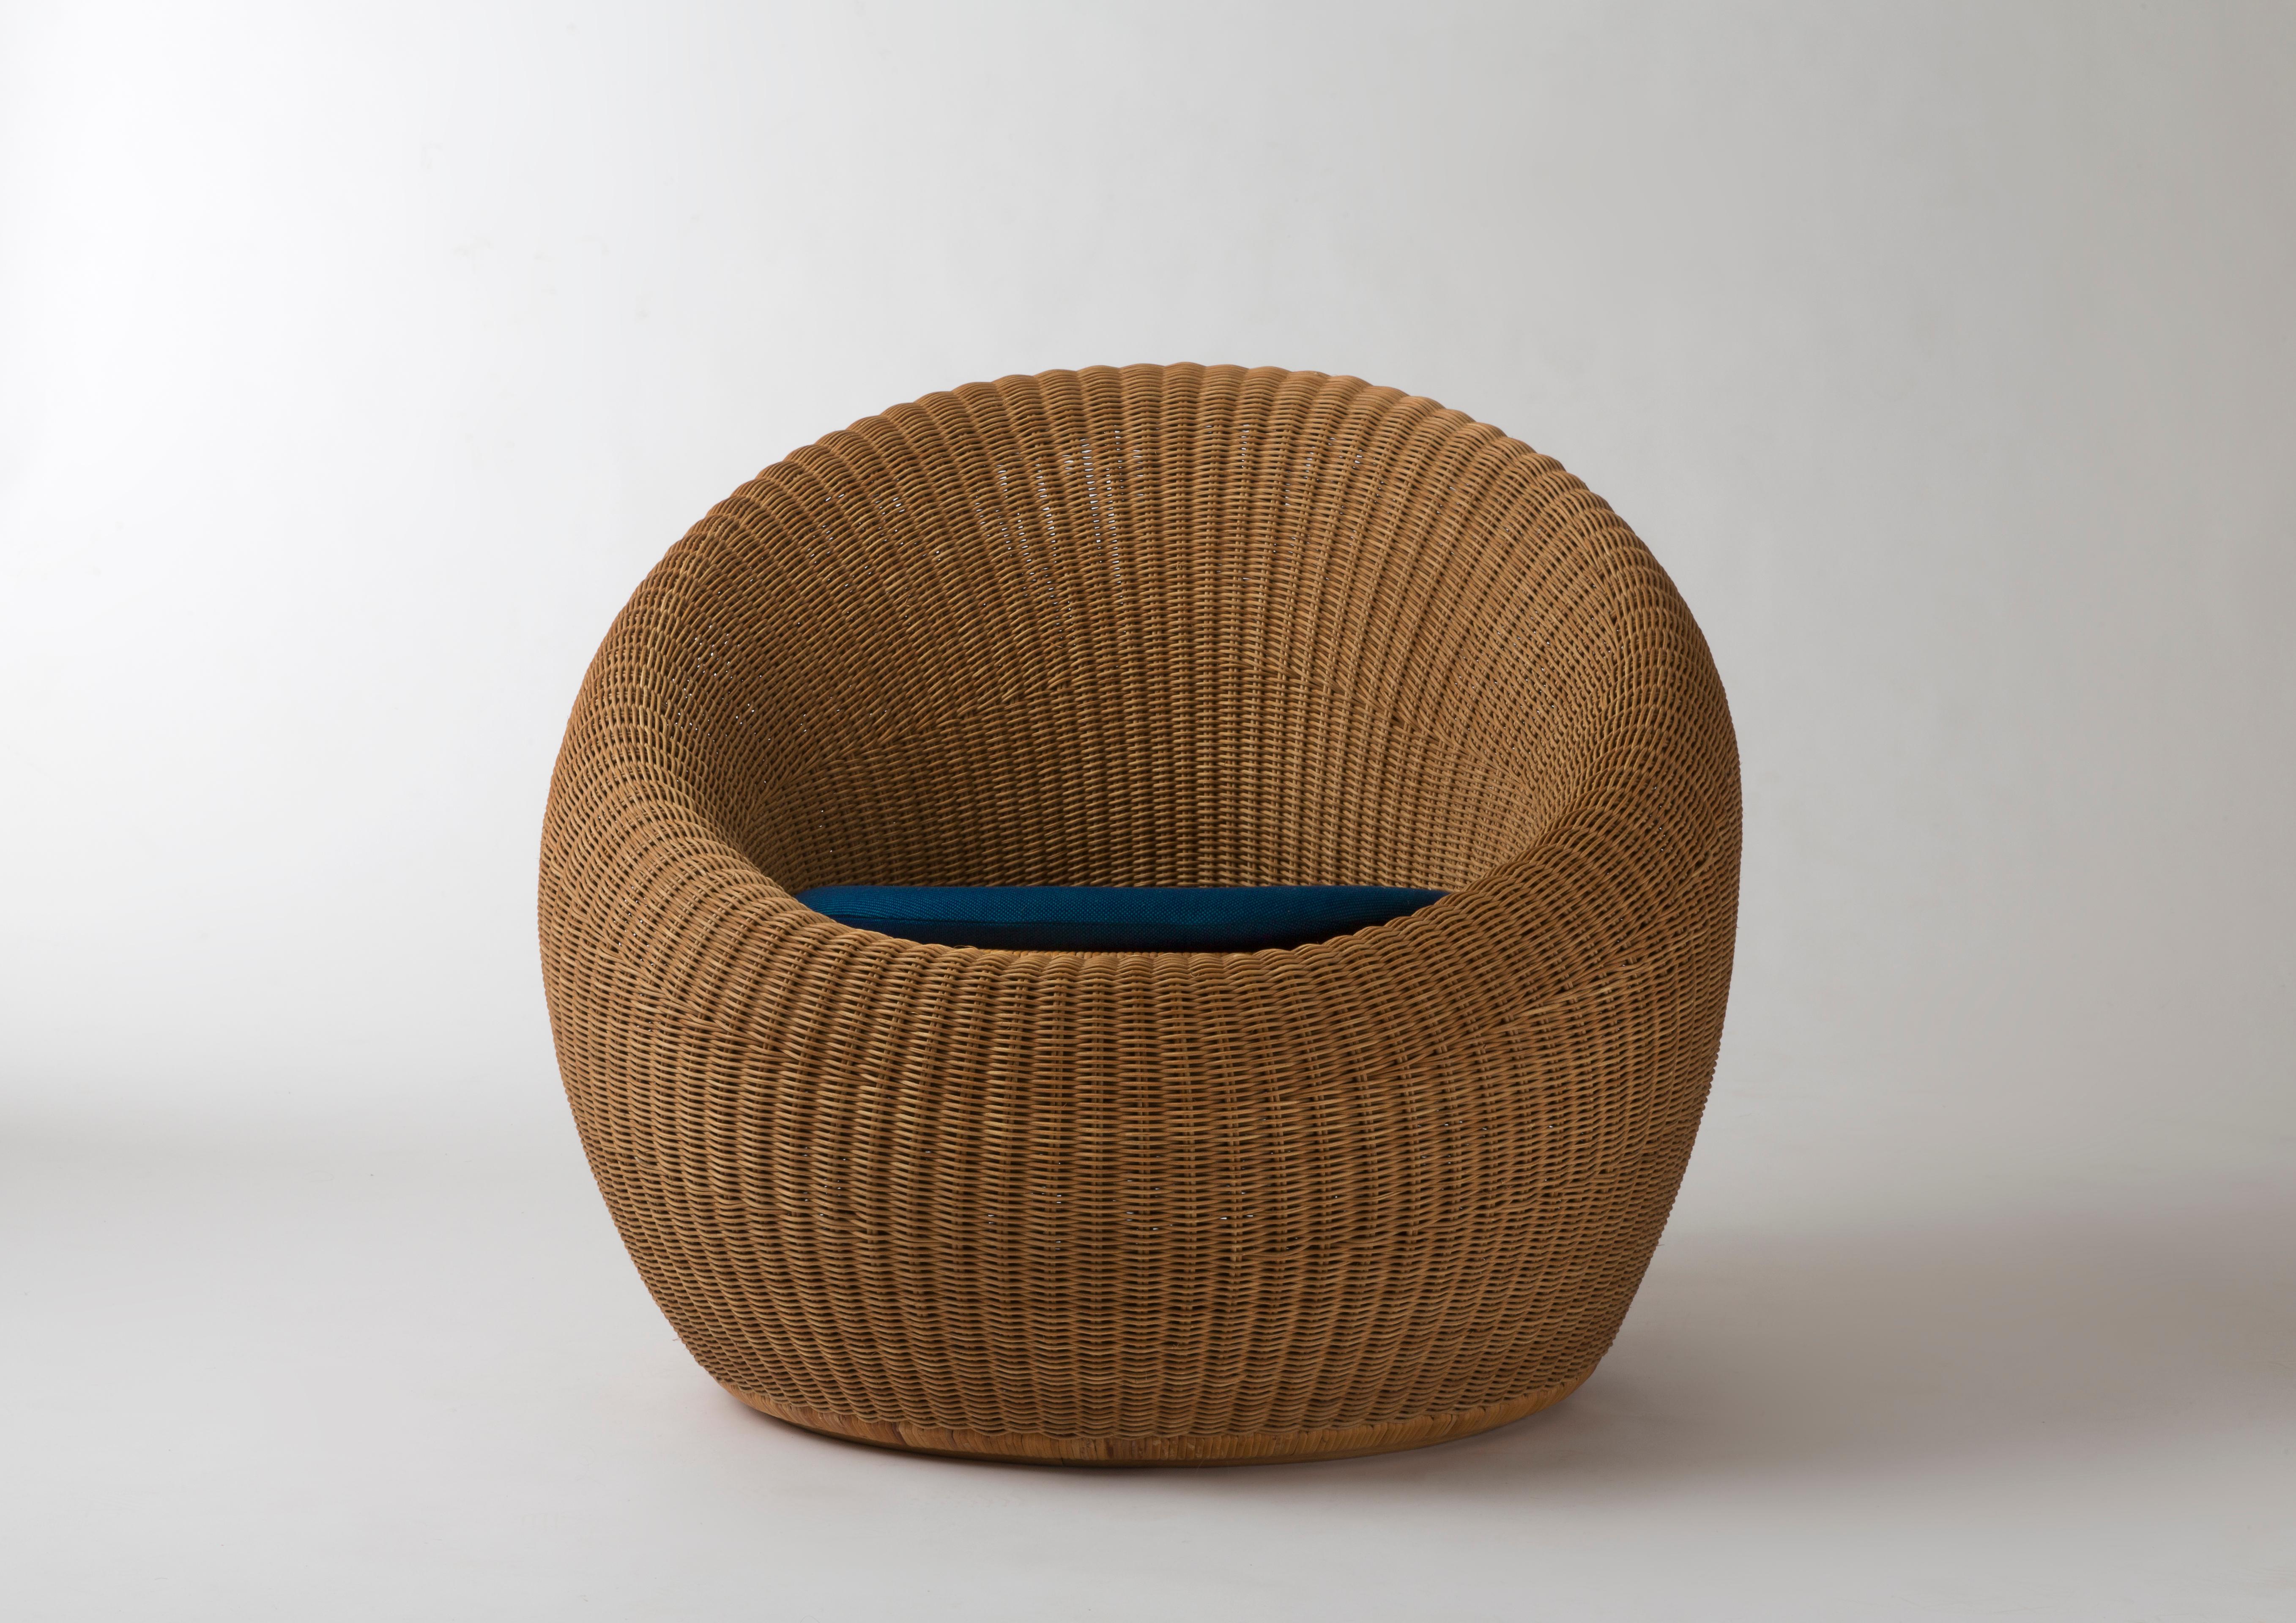 An easy chair from the « Rattan Furnitures » series by the famous Japanese designer Isamu Kenmochi (1912-1971), in rattan on bamboo, manufactured by Yamakawa Rattan, Japan, model designed in 1958.